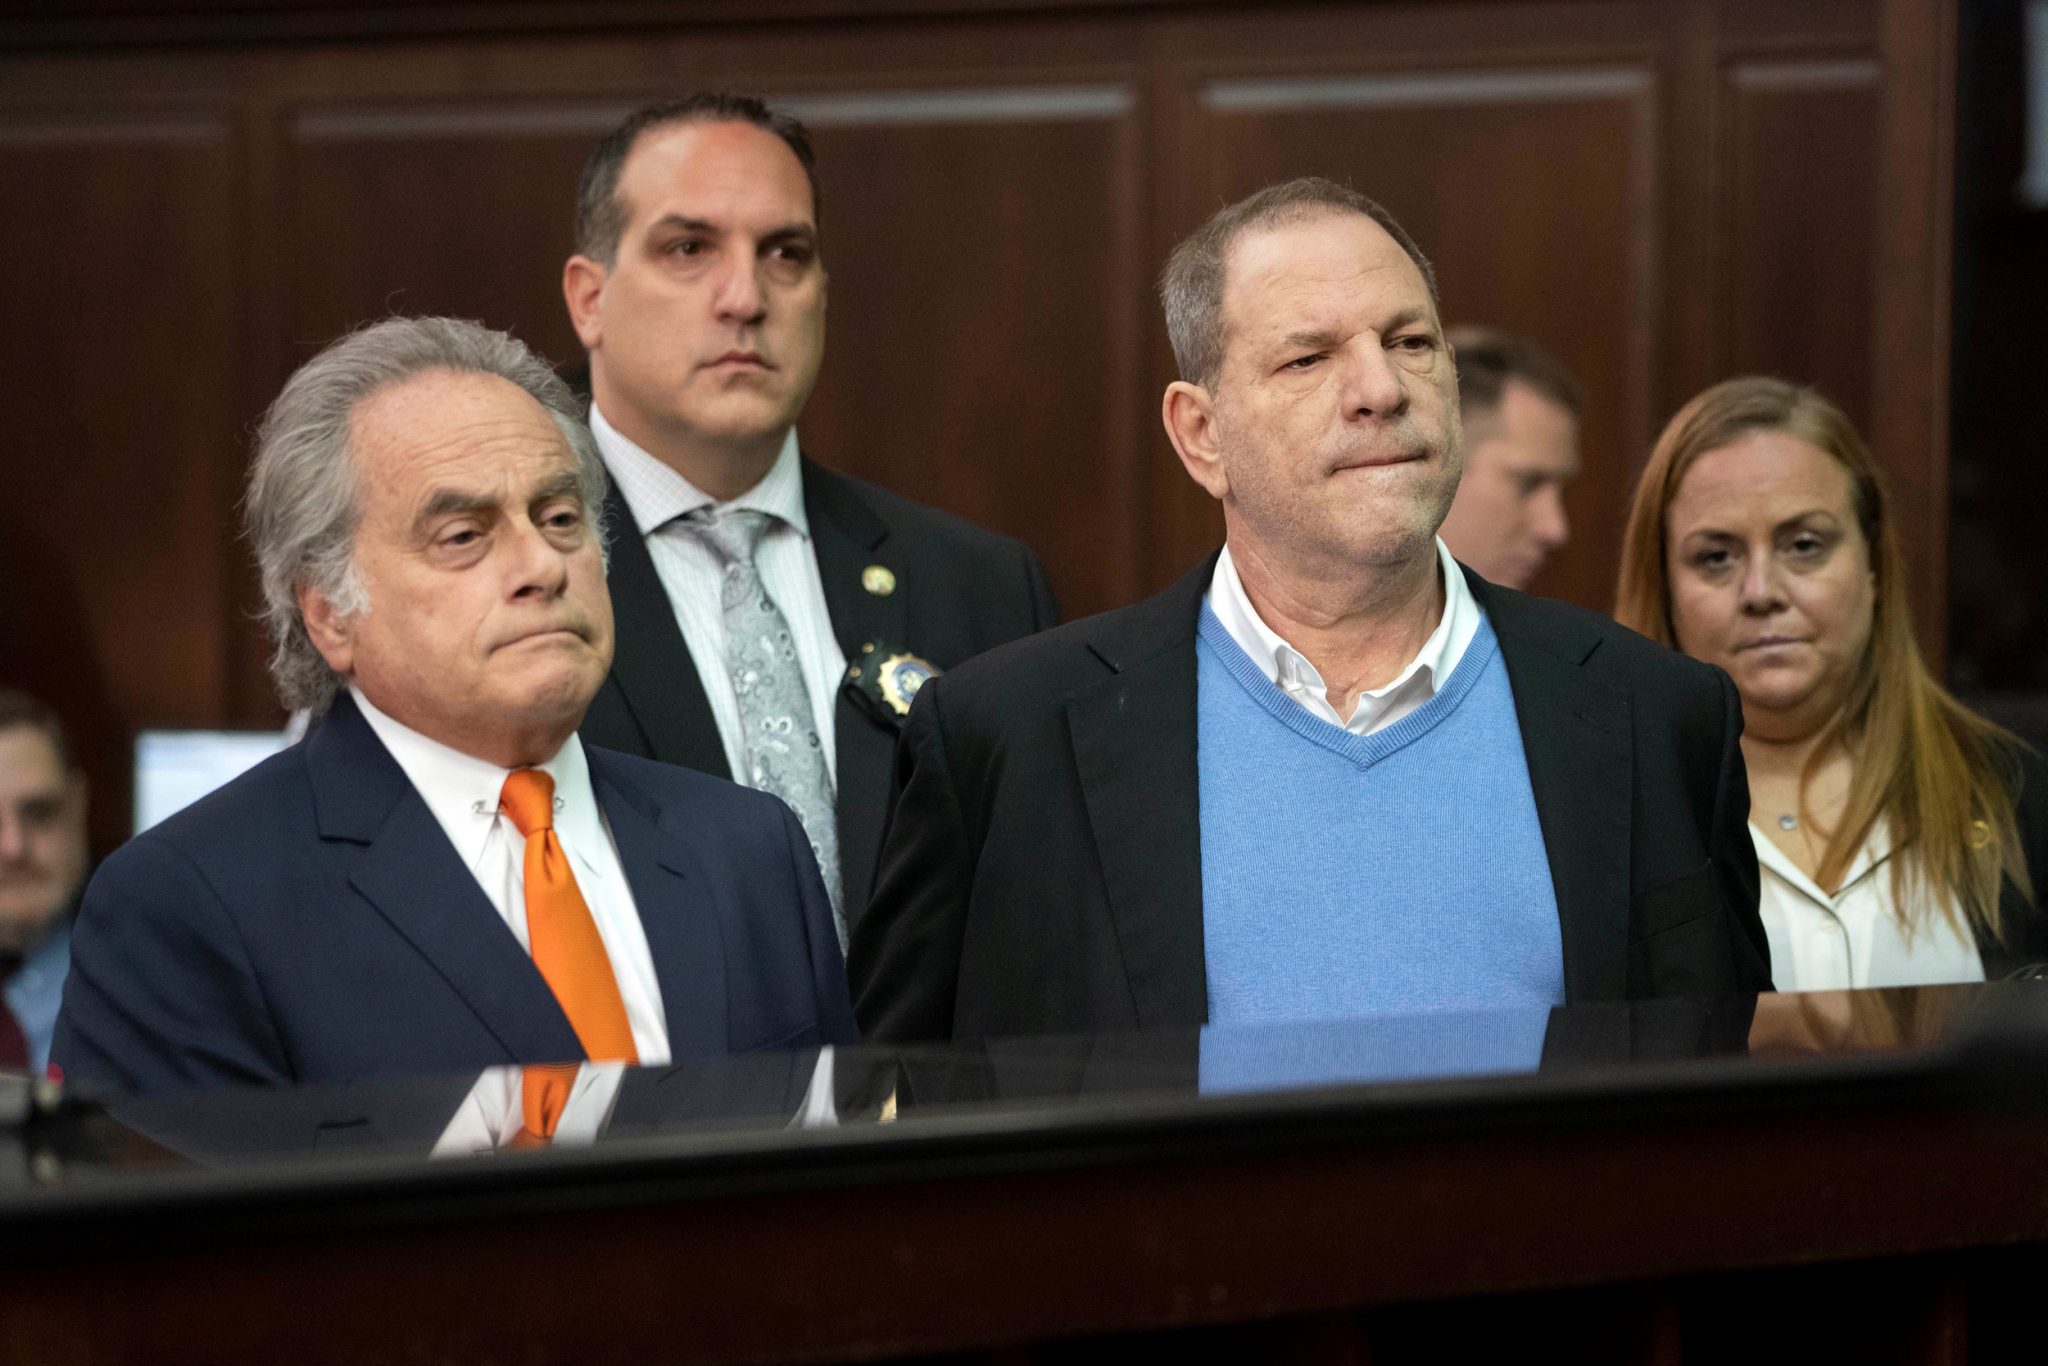 Harvey Weinstein indicted on charges of rape, criminal sexual act